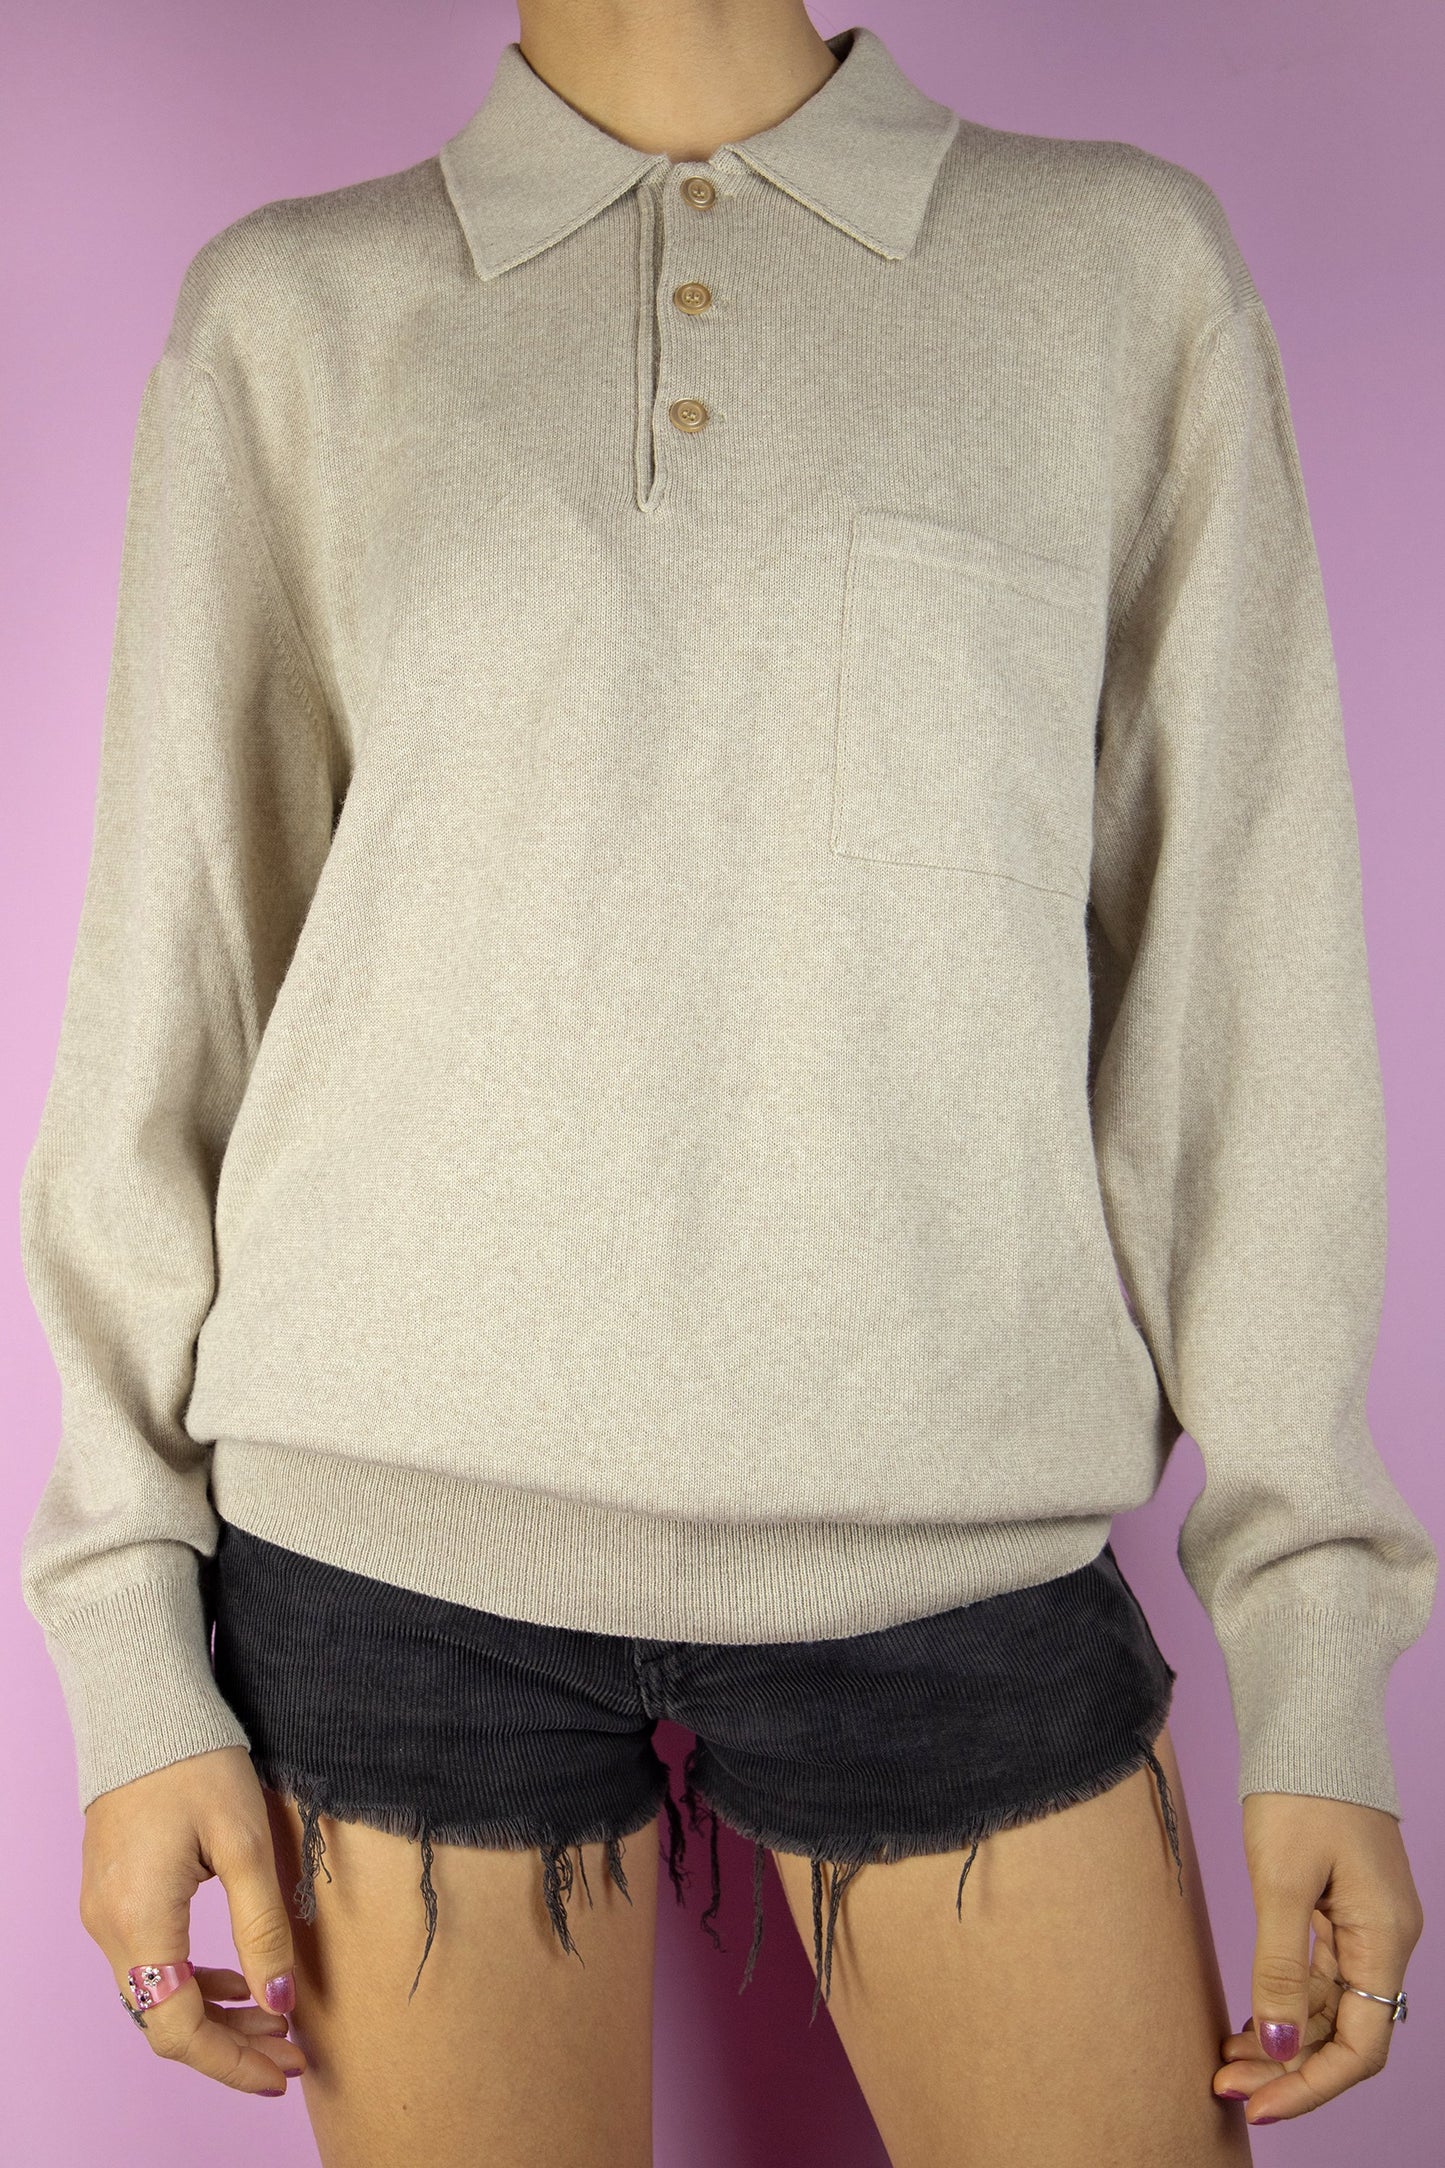 Vintage 90's Light Brown Collared Sweater - L